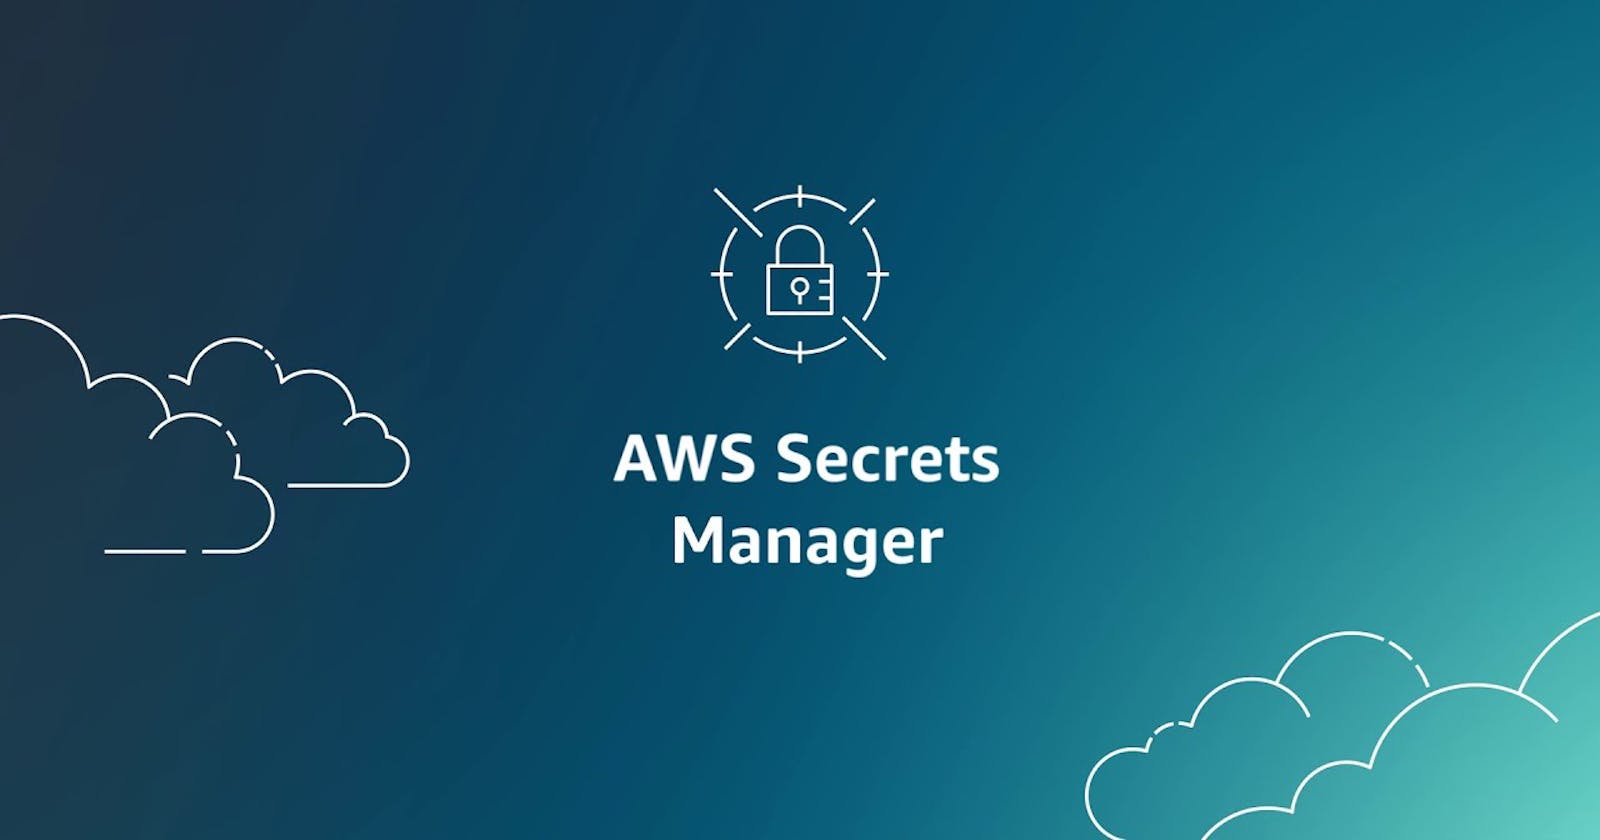 Securing and Rotating Secrets Easily with AWS Secrets Manager (Part 1 of 2)